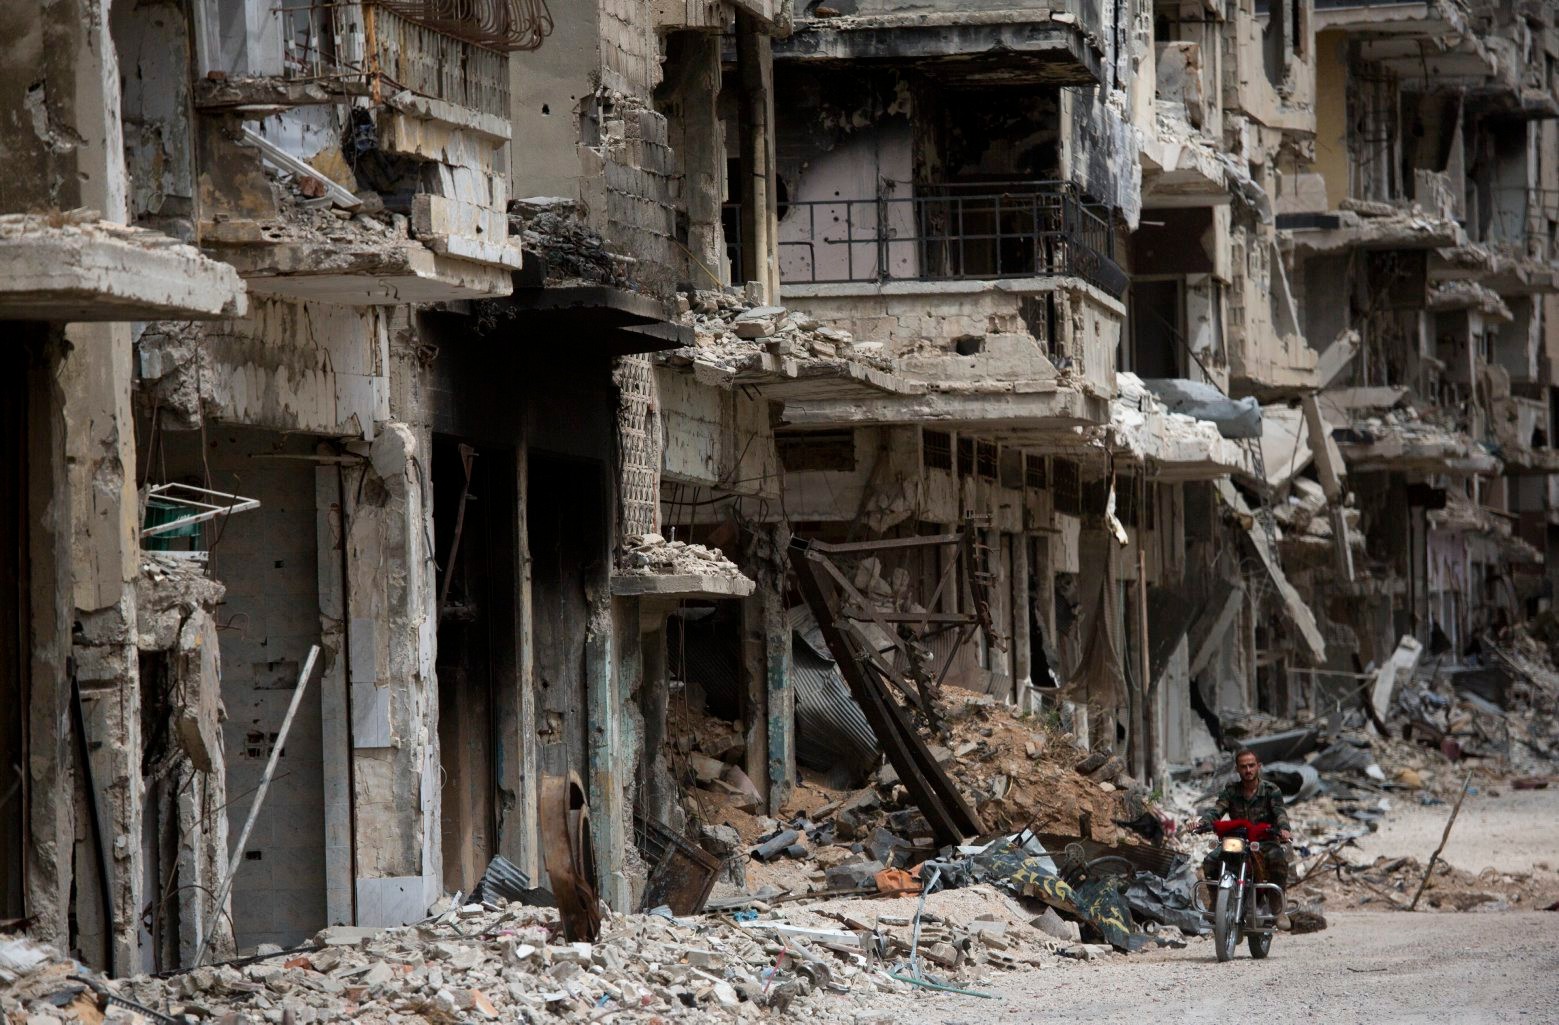 FILE - In this Thursday June 5, 2014 file photo, a man rides a motorcycle in a devastated part of Homs, Syria. (AP Photo/Dusan Vranic, File) Mideast Syria Timeline